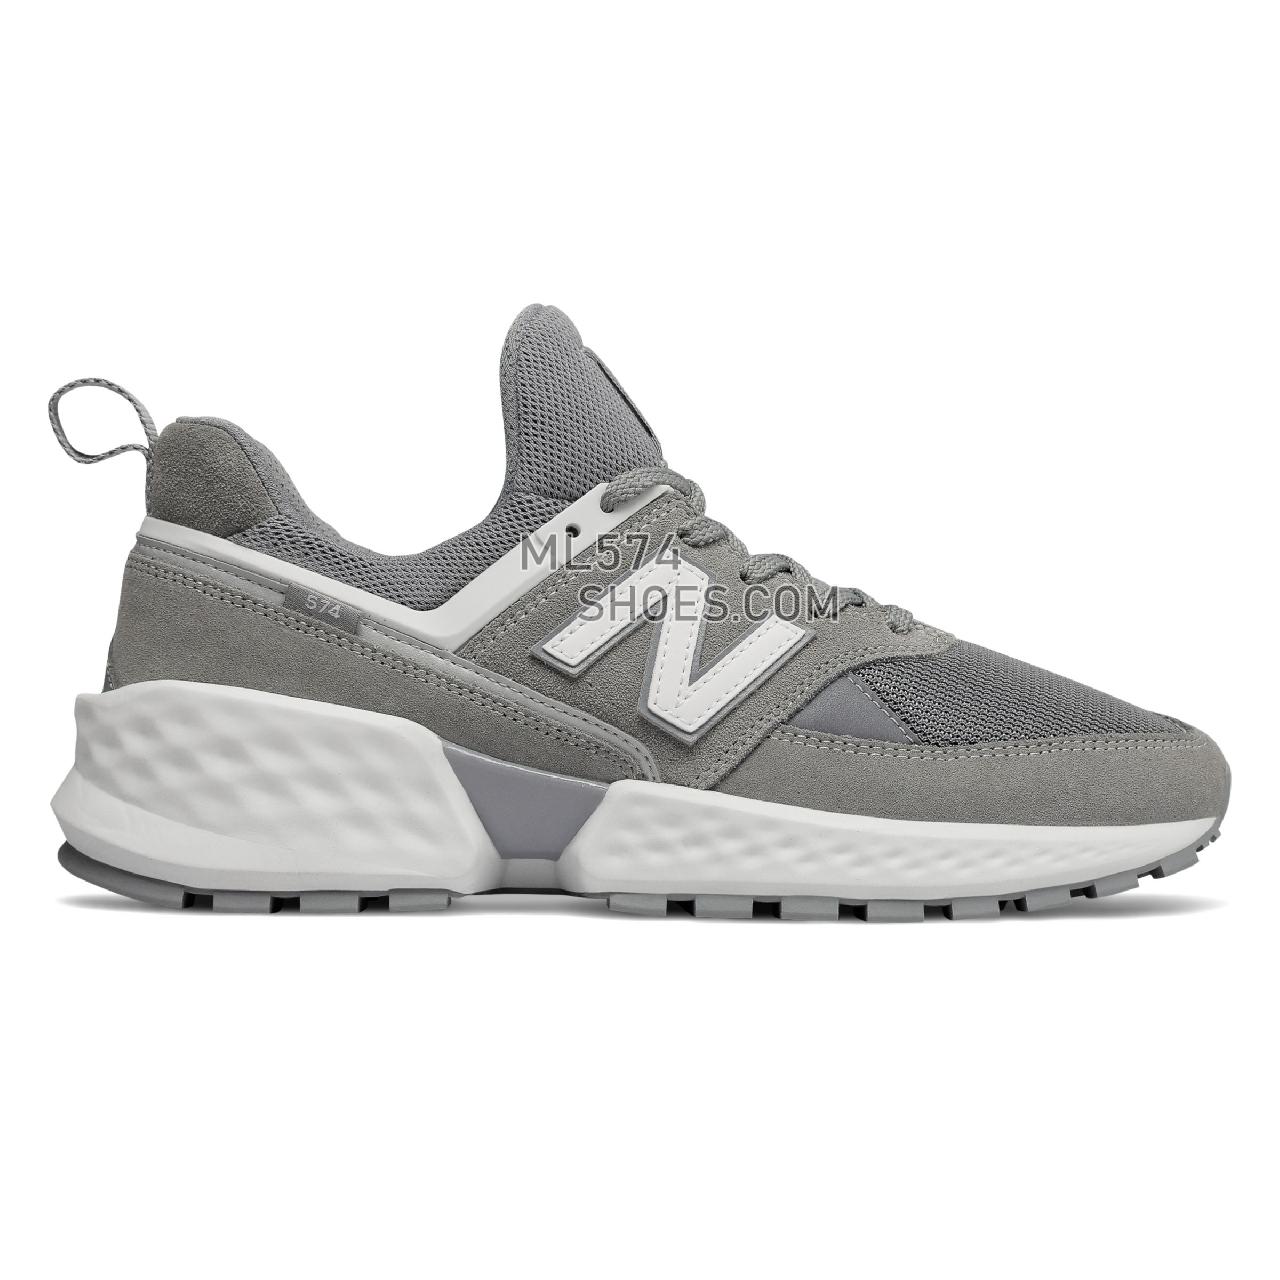 New Balance 574 Sport - Men's Sport Style Sneakers - Steel with White - MS574NSB